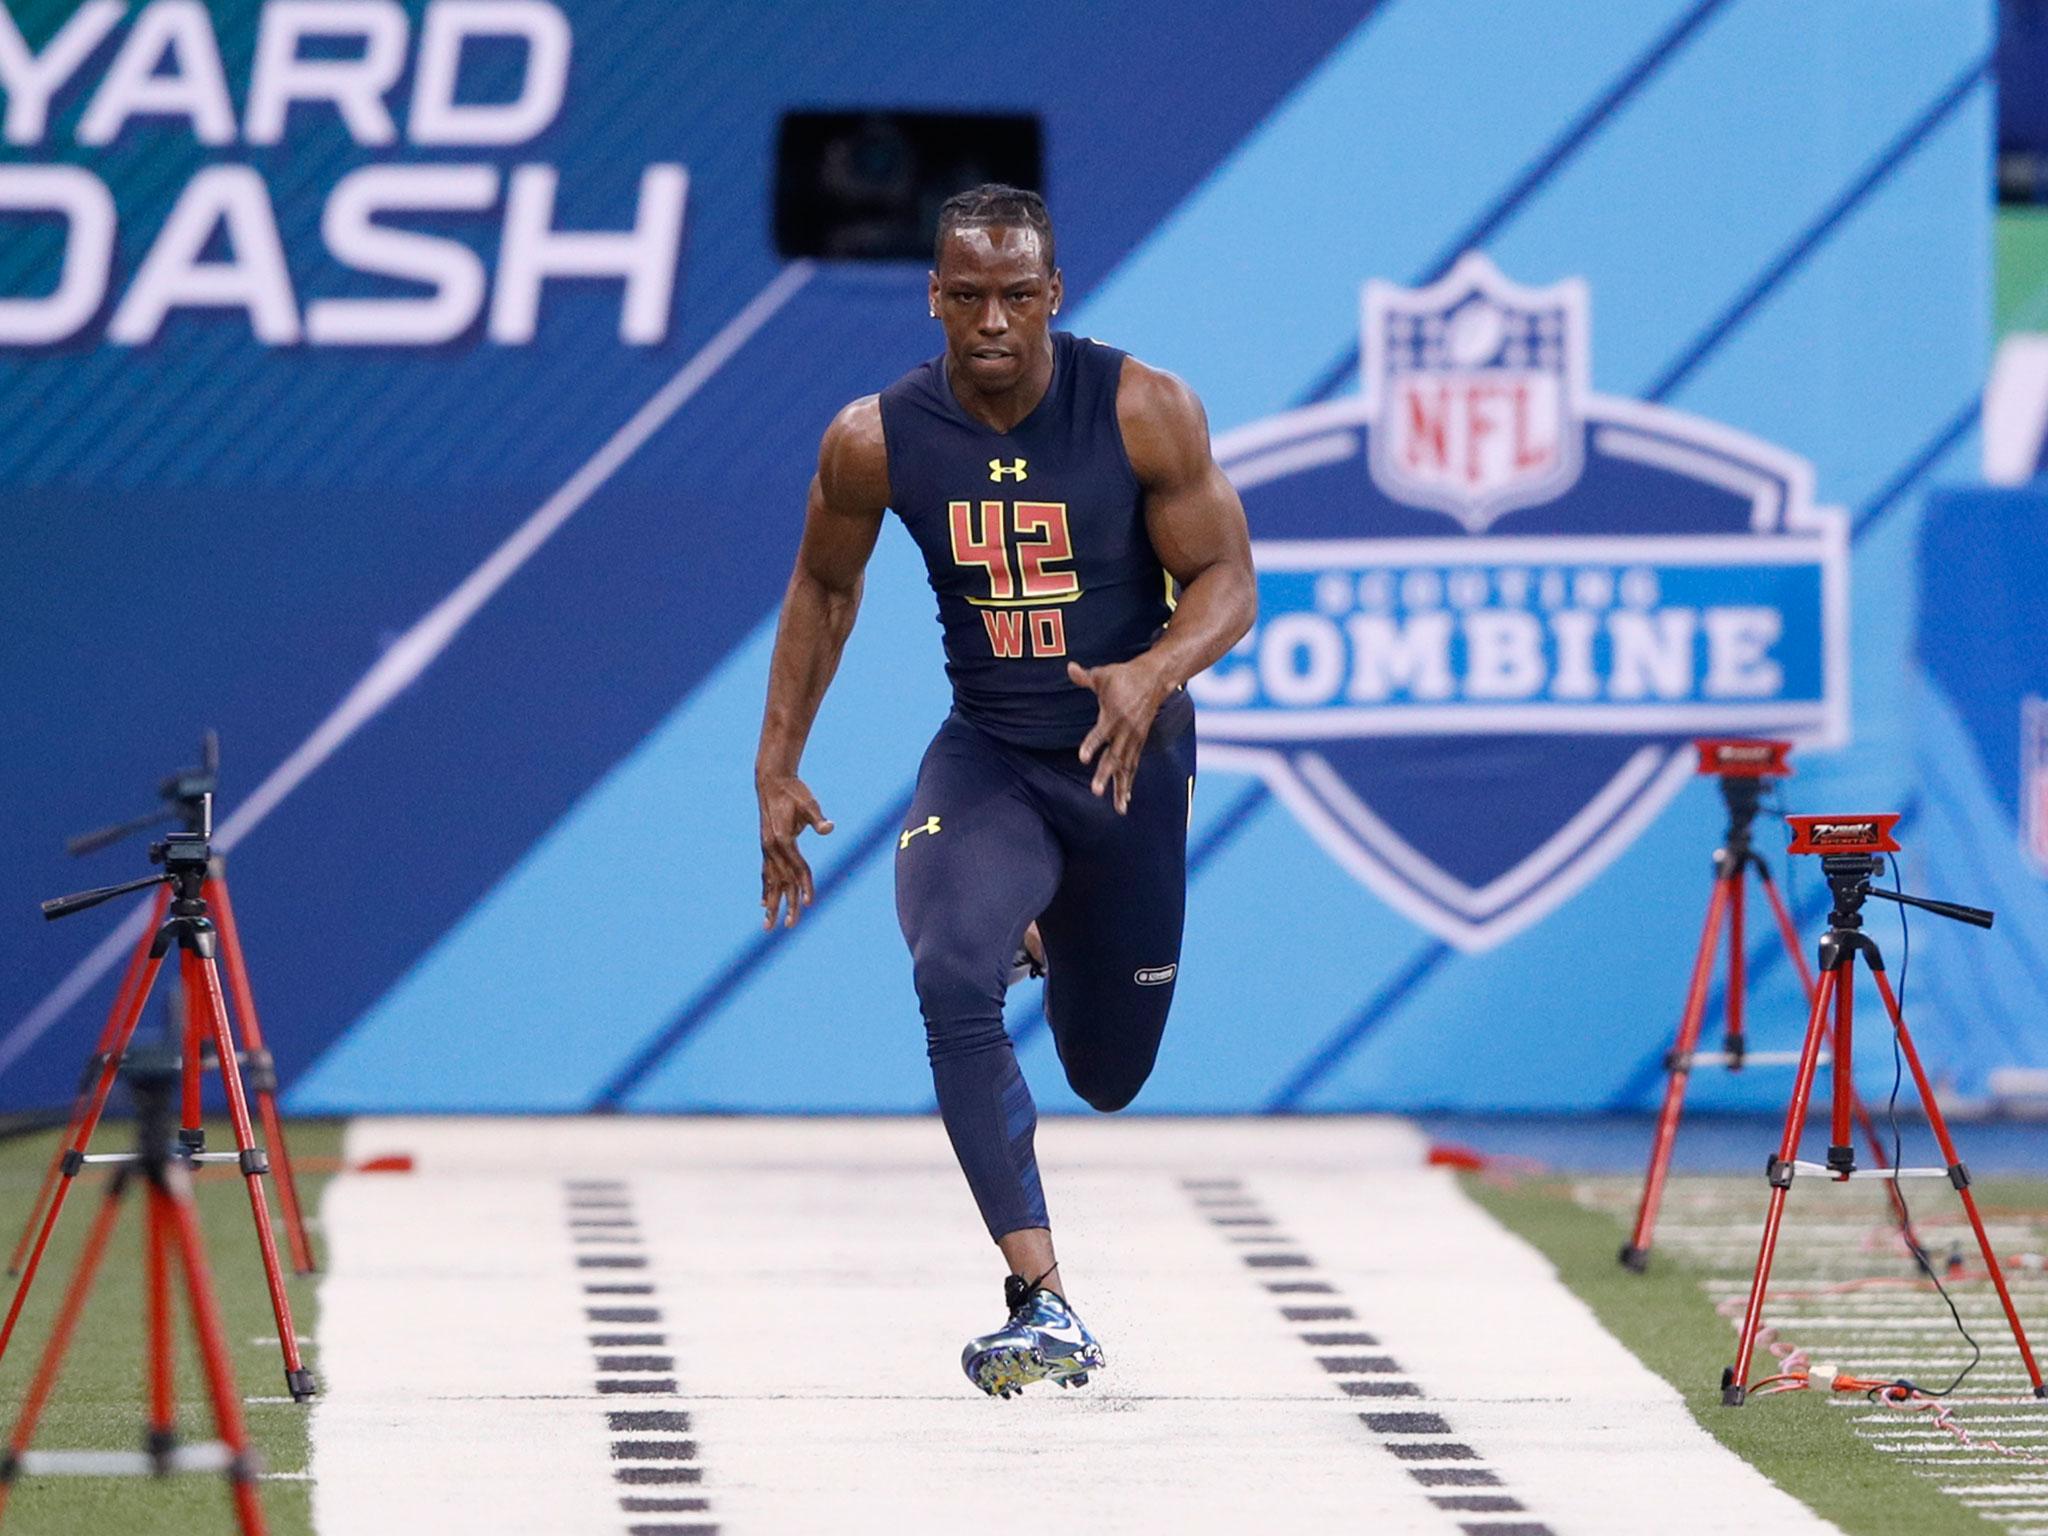 John Ross put on a show in the 40-yard dash at the Combine